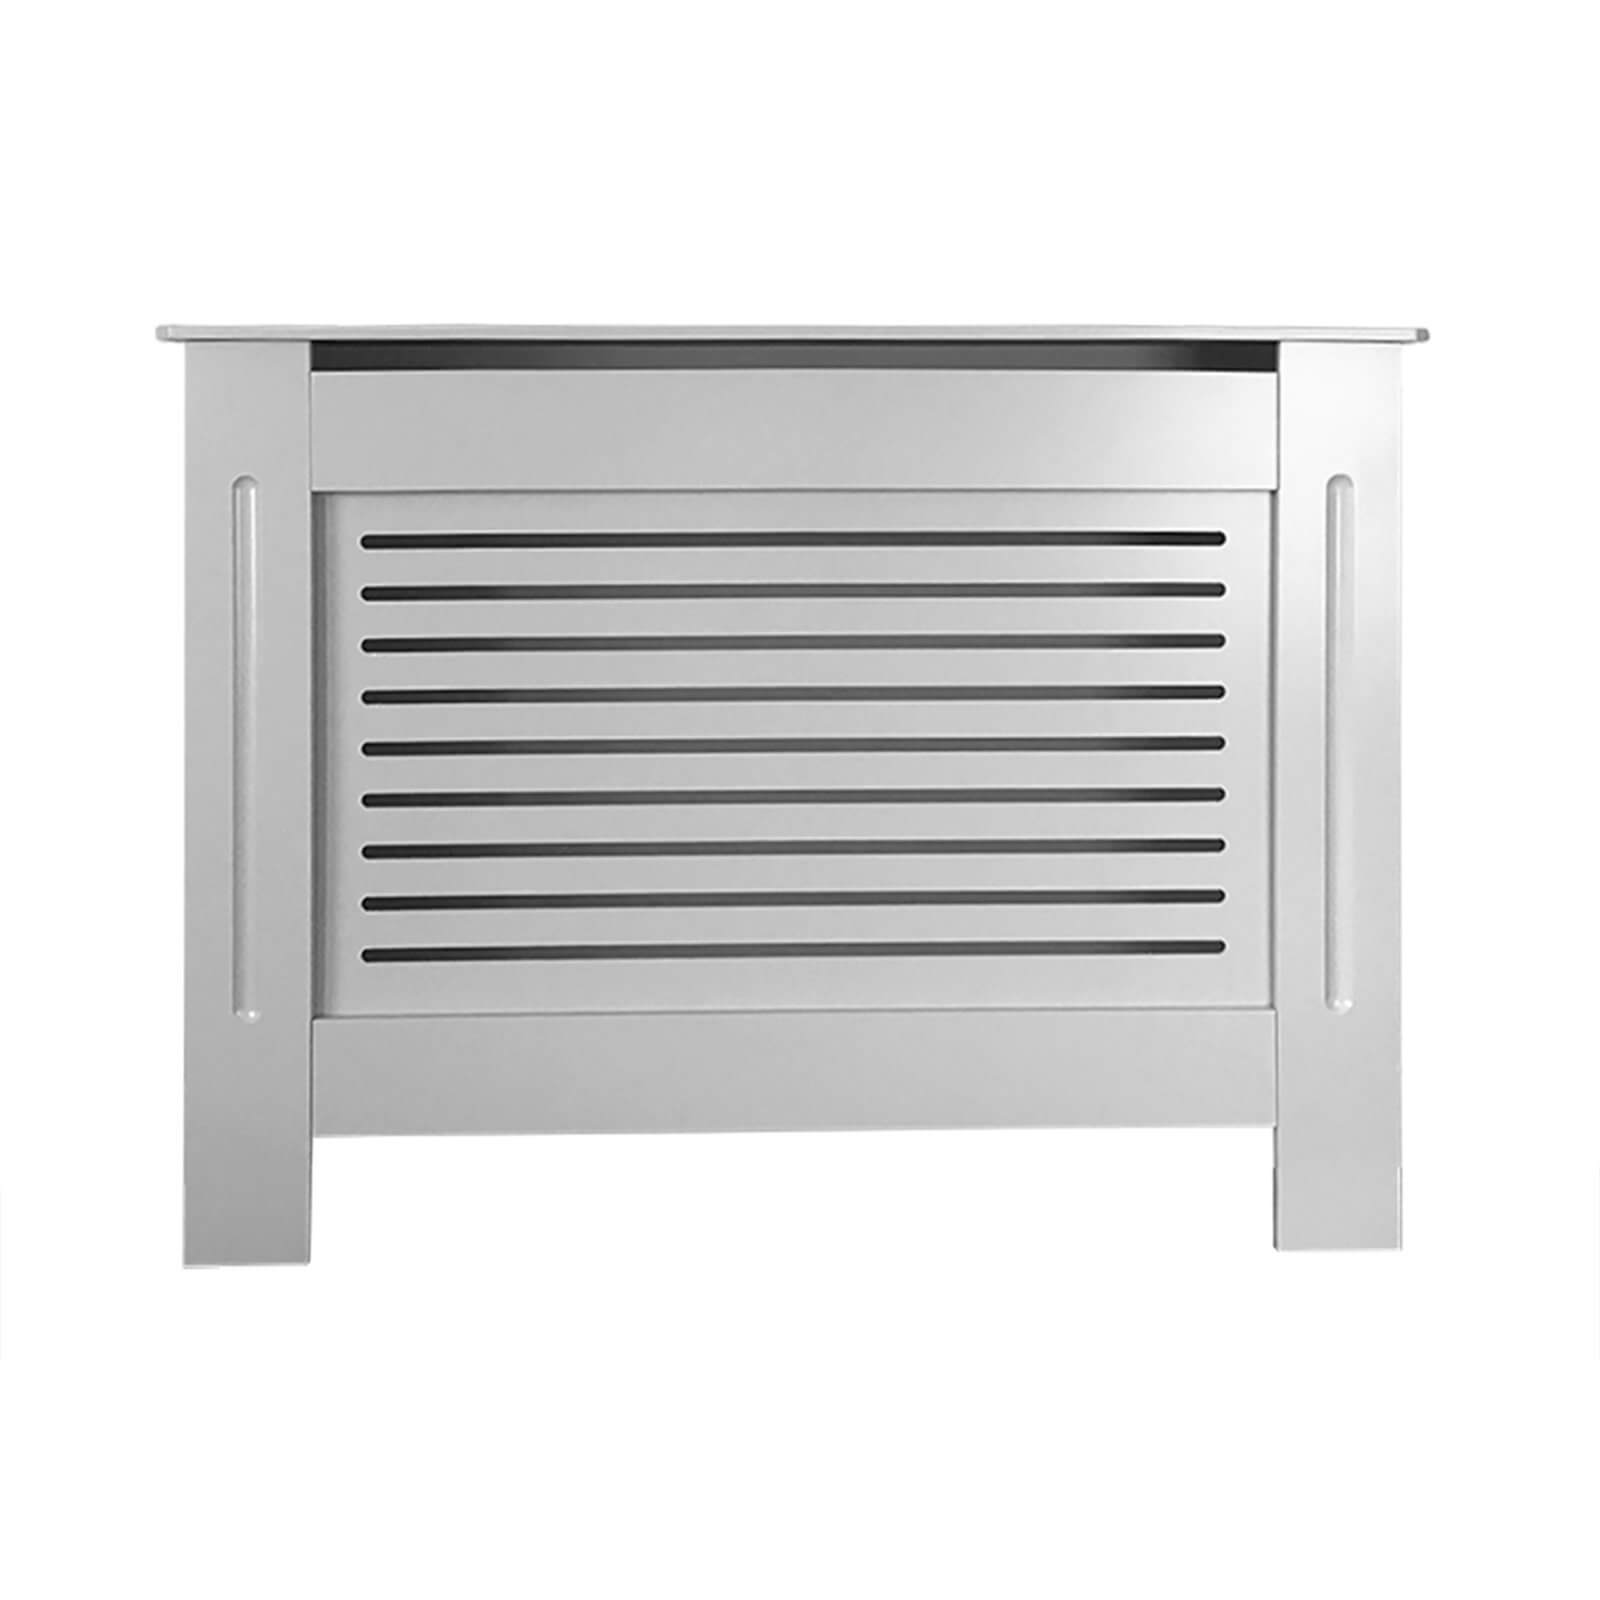 Radiator Cover with Horizontal Slatted Design in Grey - Small